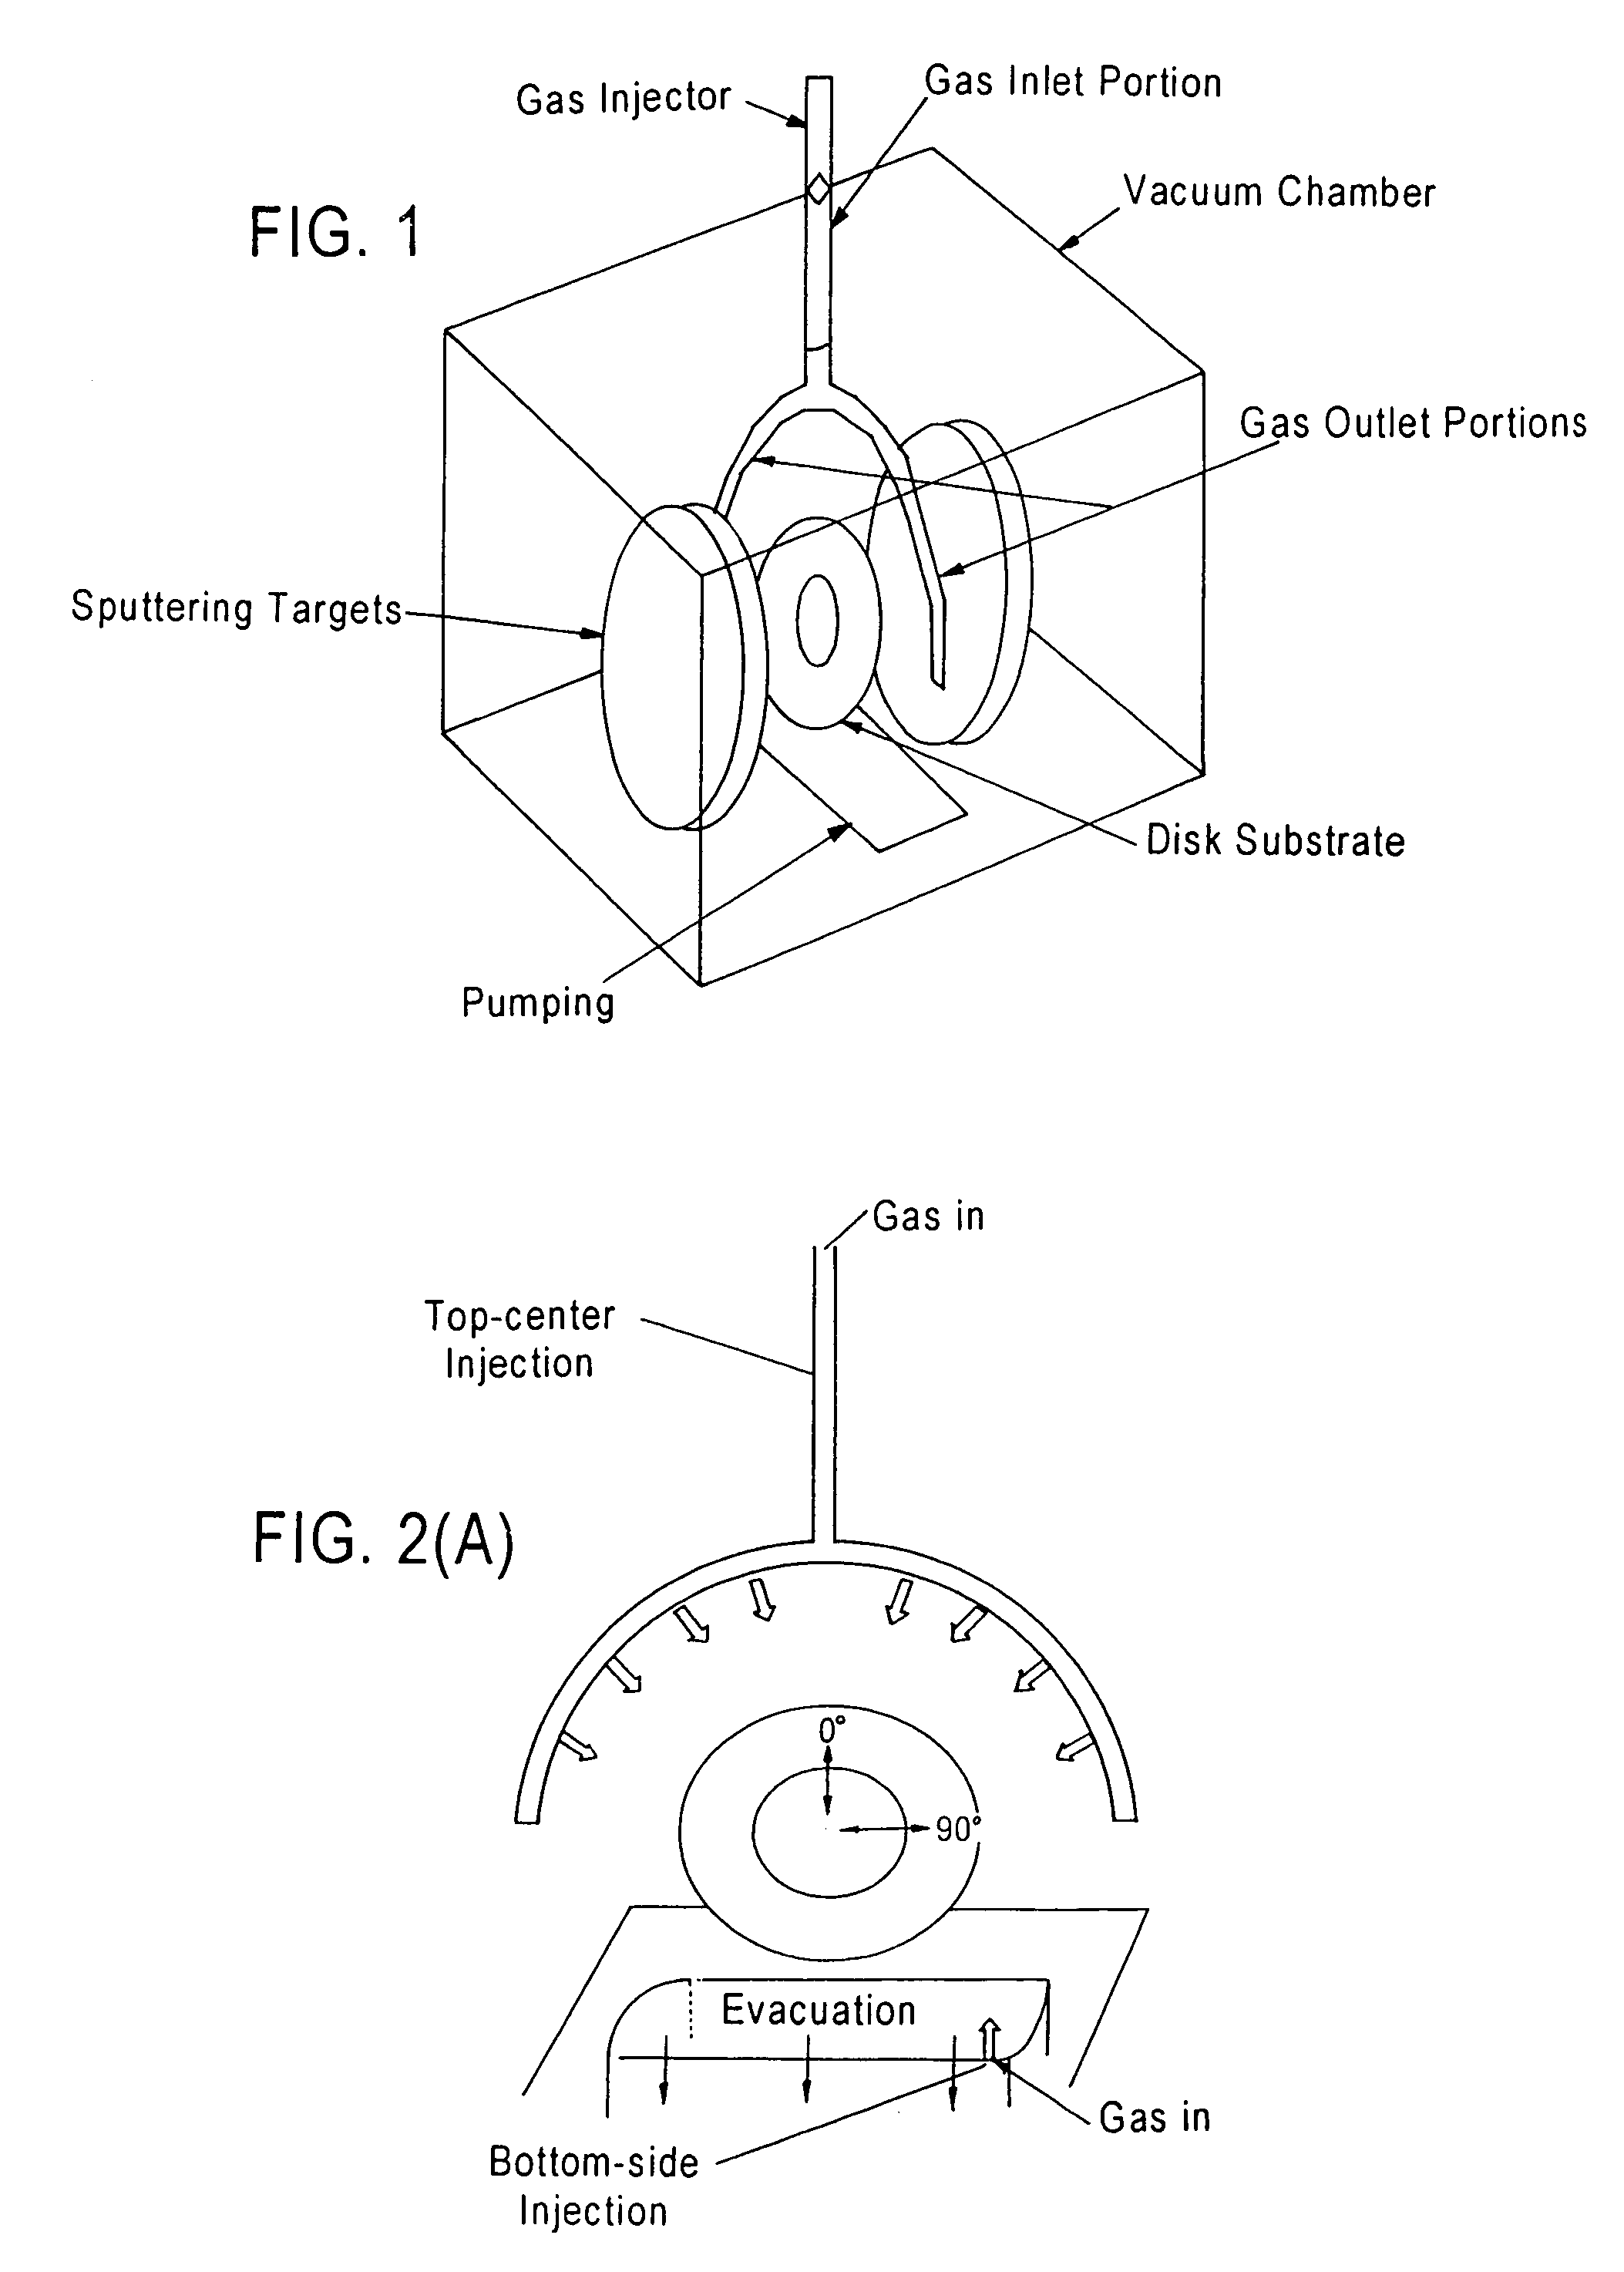 Gas injection for uniform composition reactively sputter-deposited thin films